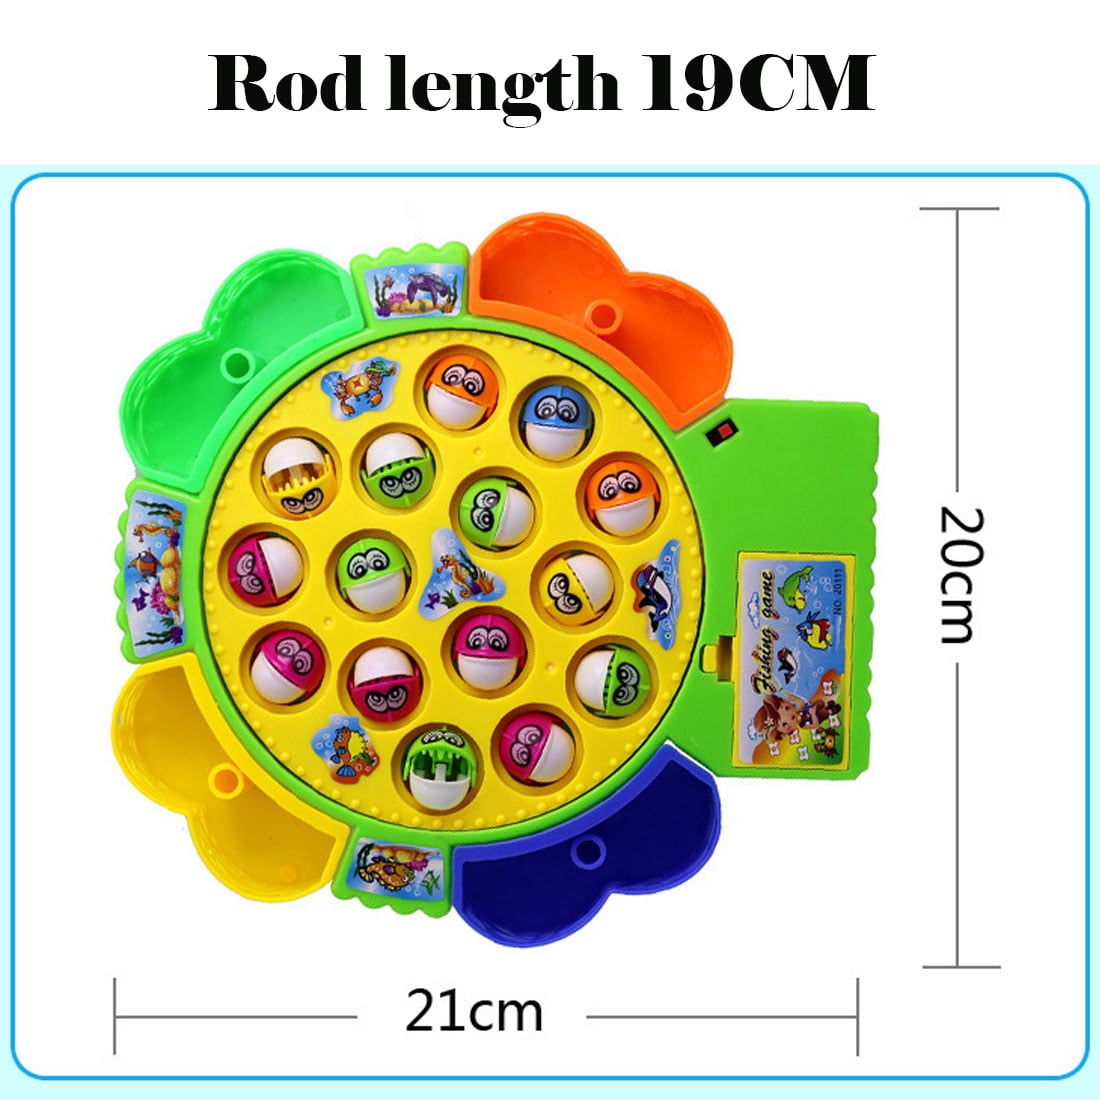 Fishing Game Mundo Toys Rotating Board Game Cooking Kitchen Electronic  Learning Systems for Kids Girls Boys Age 3 4 5 years.